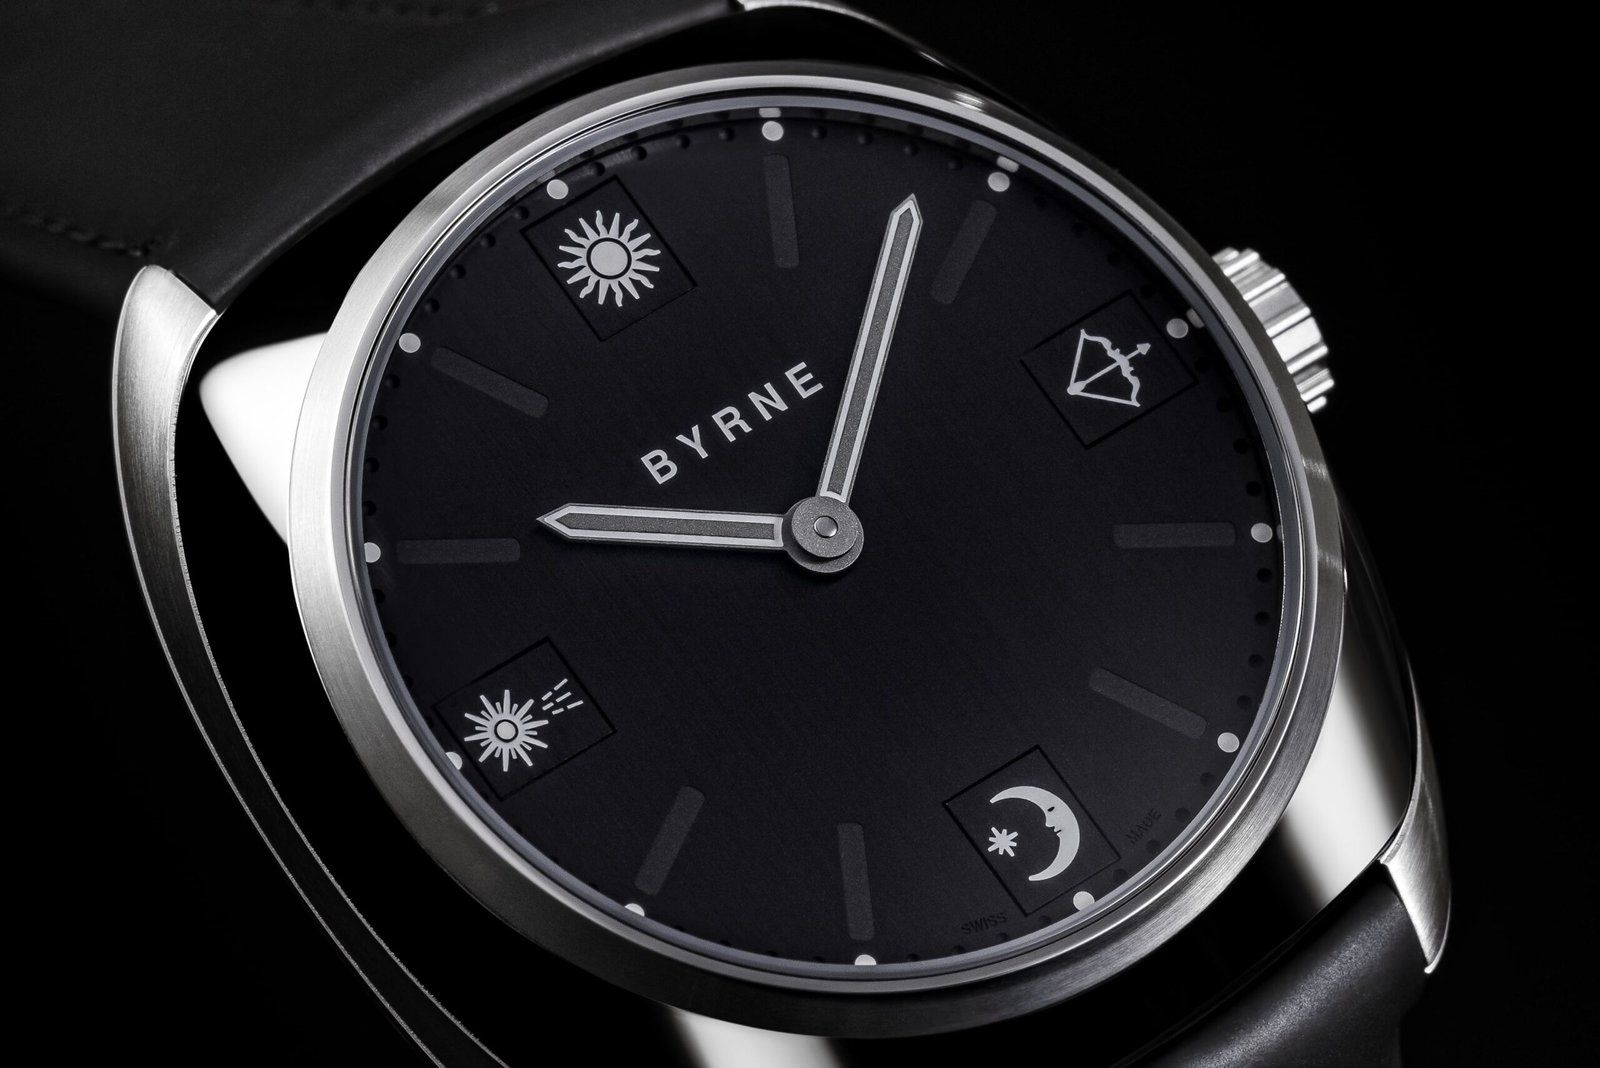 Byrne Watch offers customers the possibility of personalizing the cardinal indexes –at 3, 6, 9 and 12 o’clock